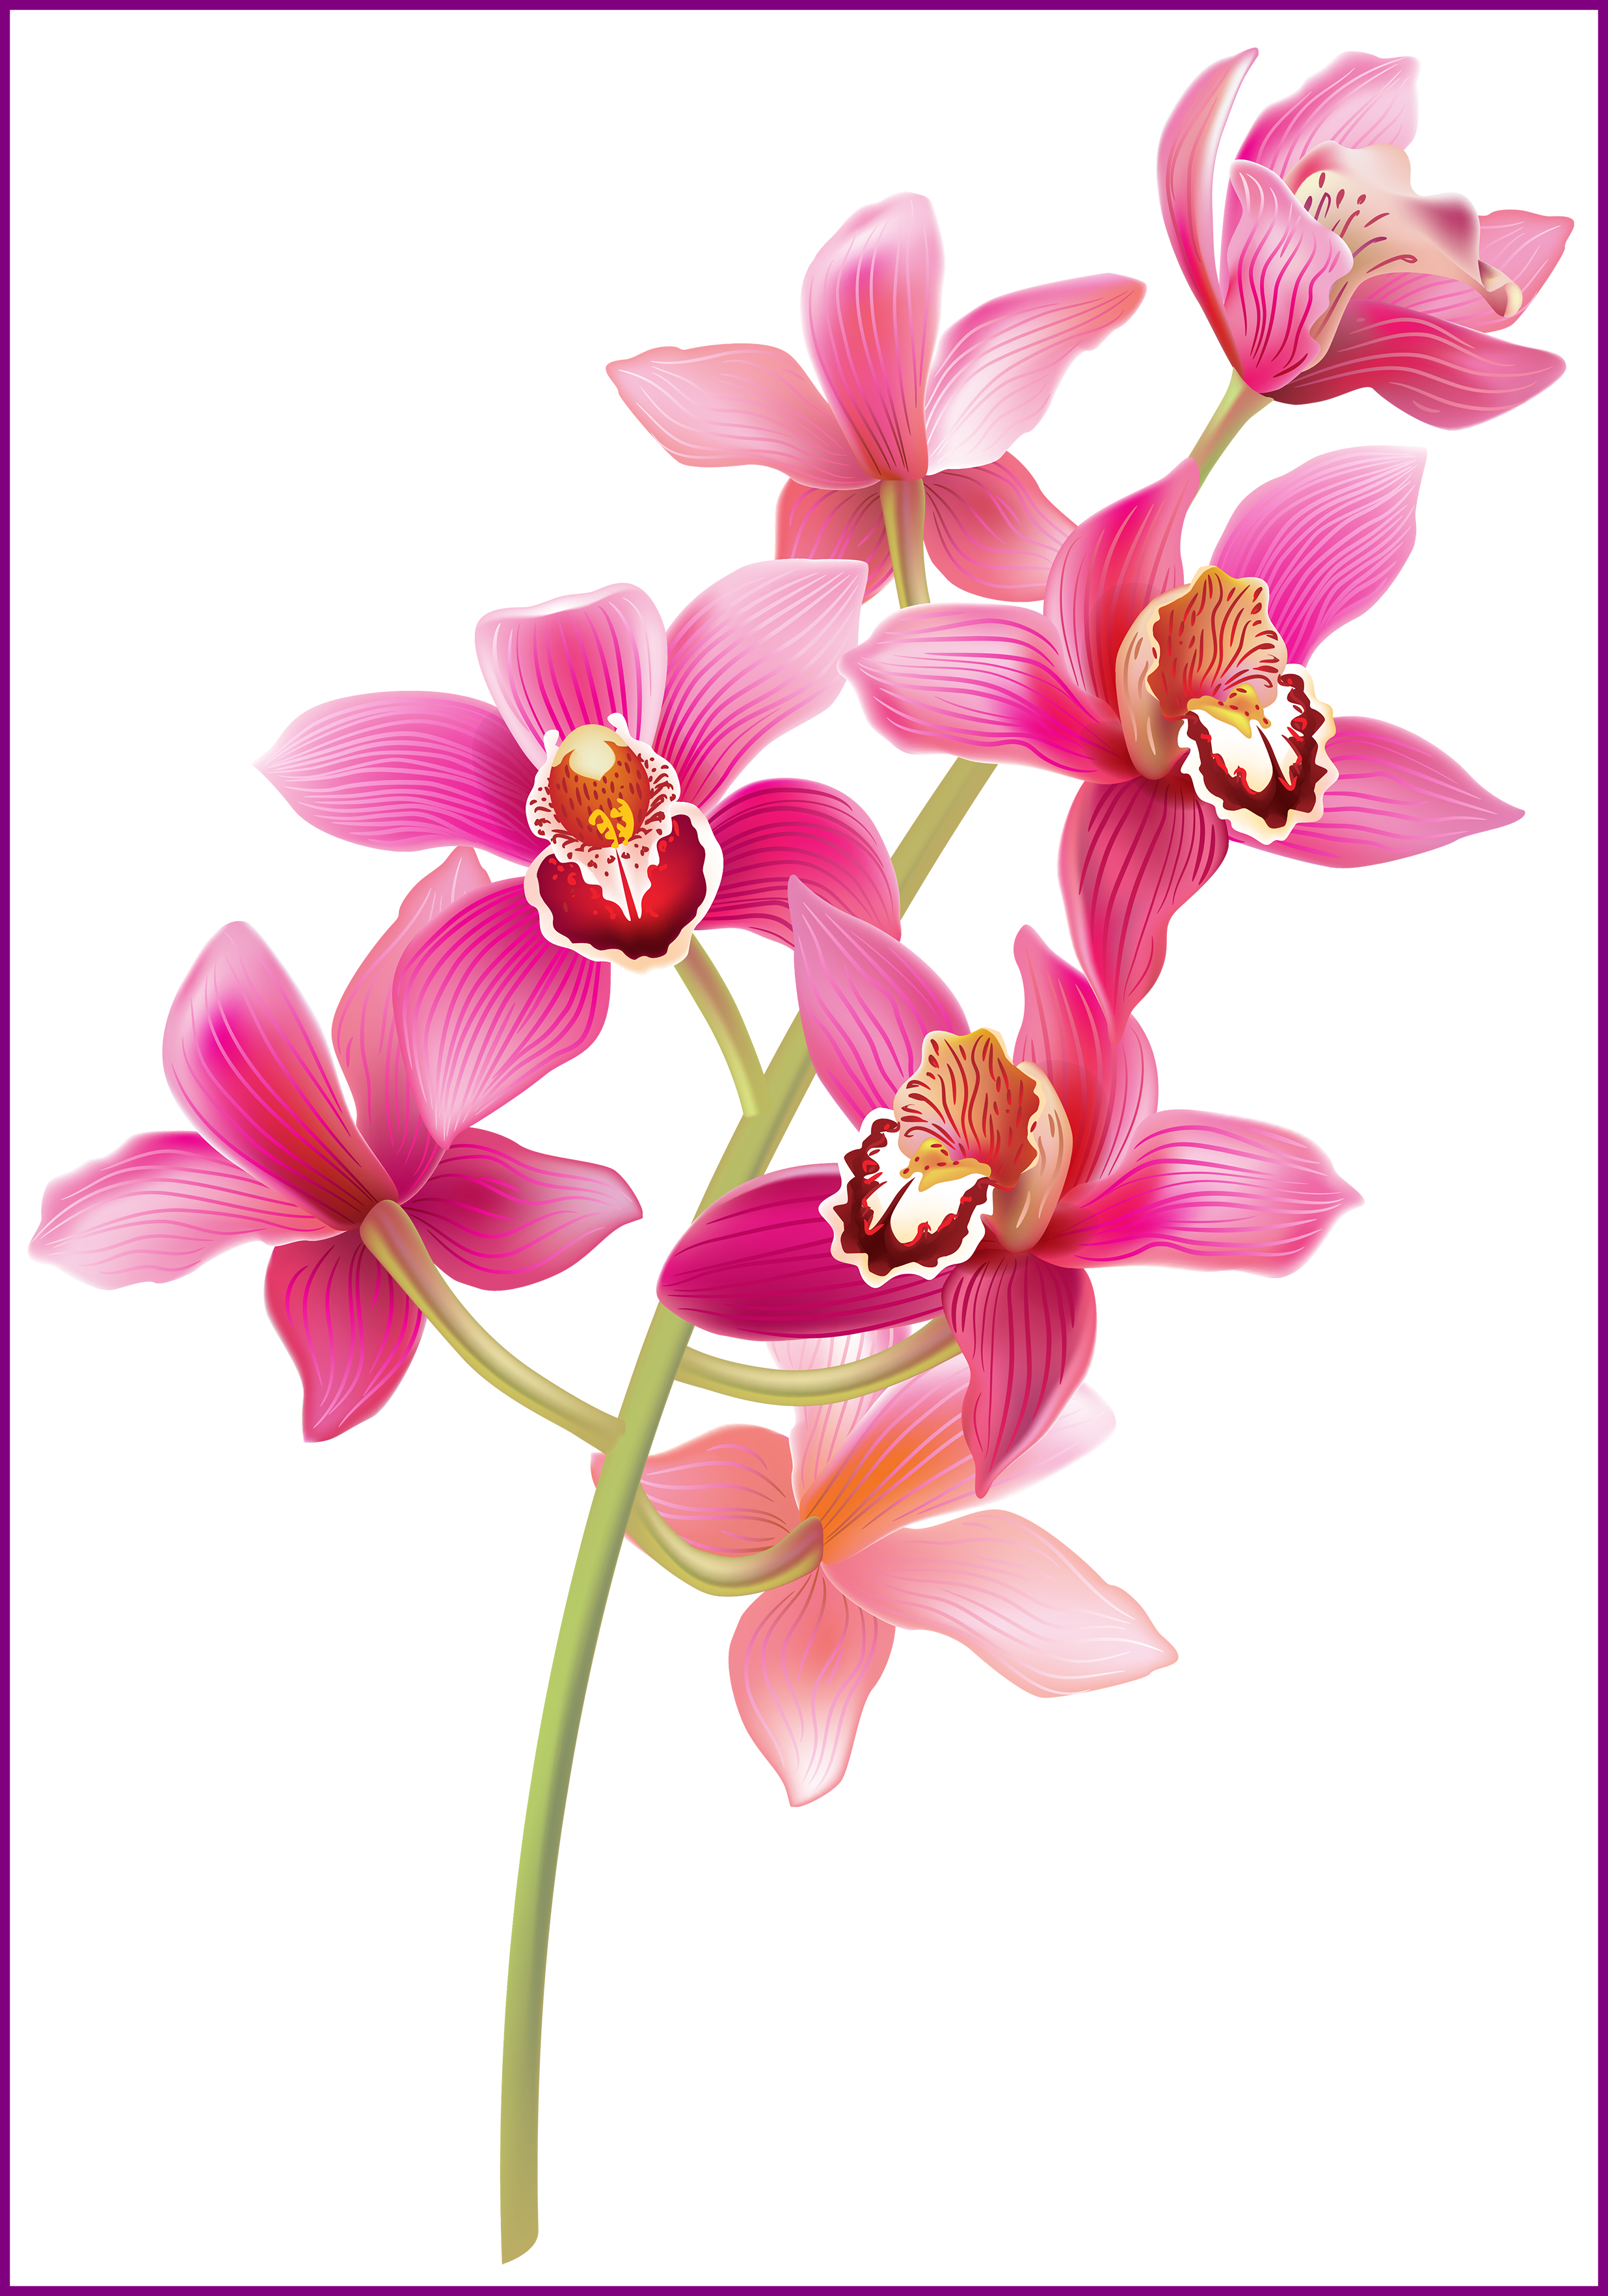 Amazing Image Result For Green Orchid Flowers Pink - Amazing Image Result For Green Orchid Flowers Pink (2472x3530)